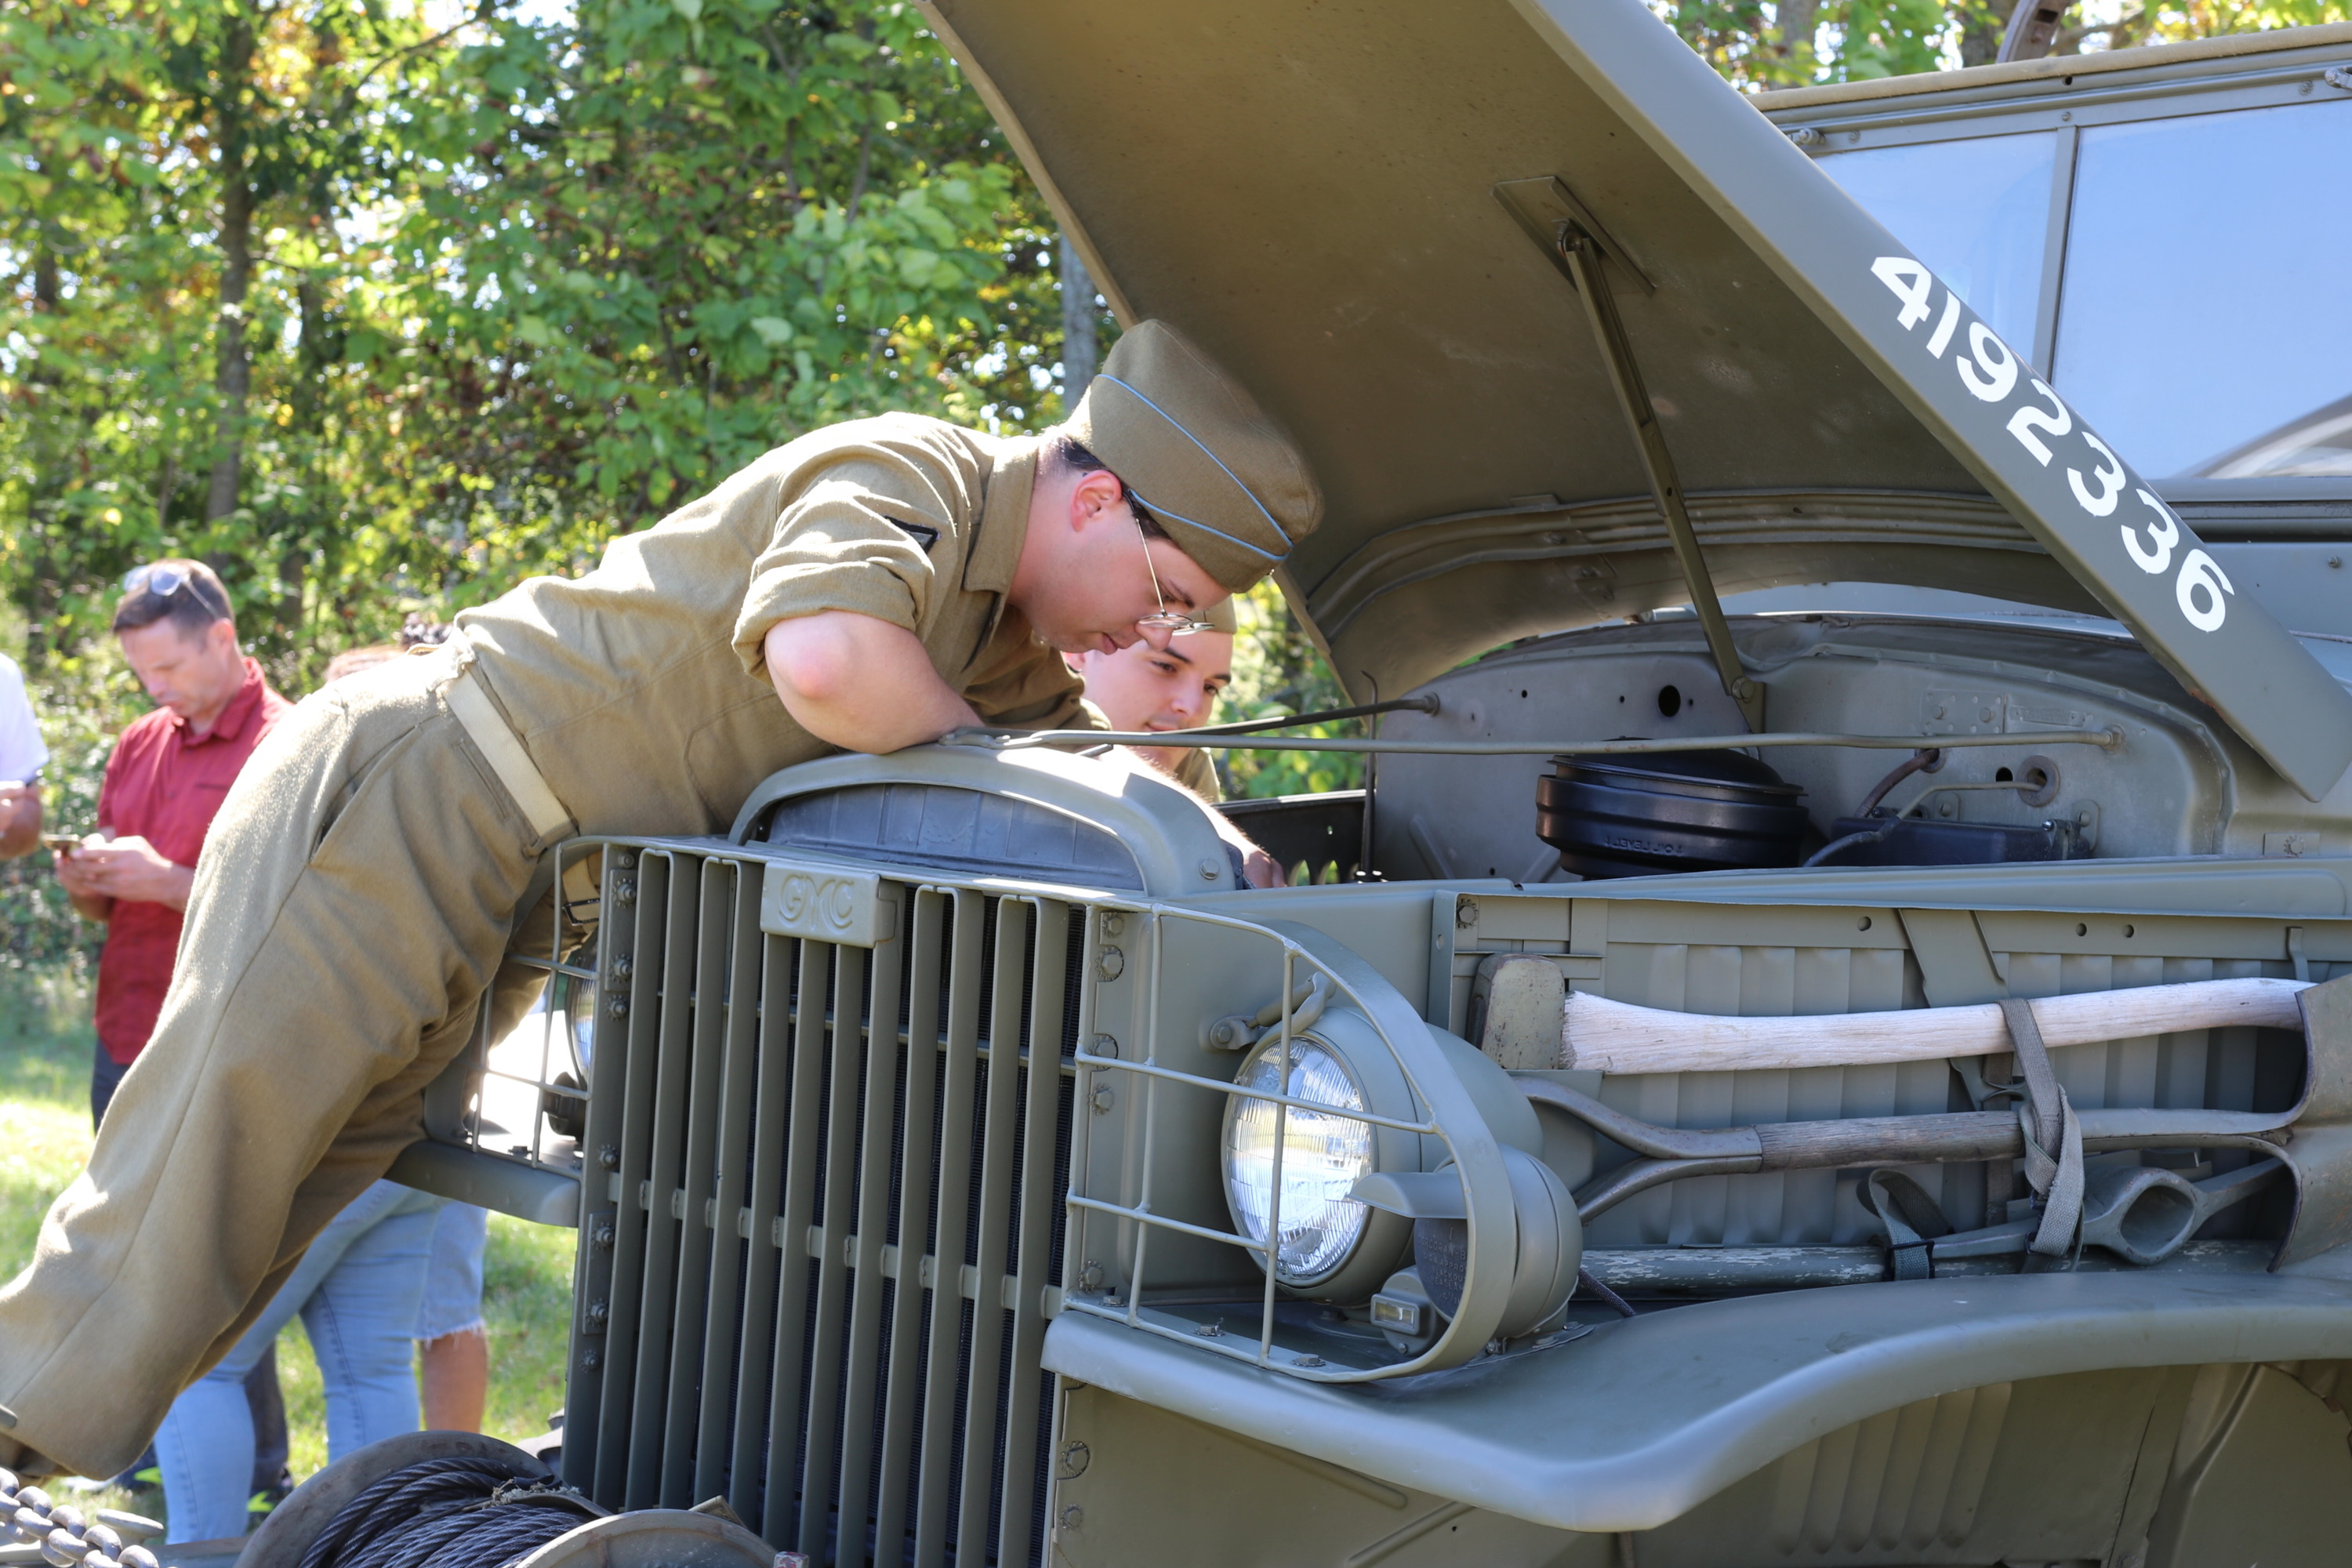 A volunteer wearing a WWII uniform leans under the green hood of a large WWII era vehicle. 